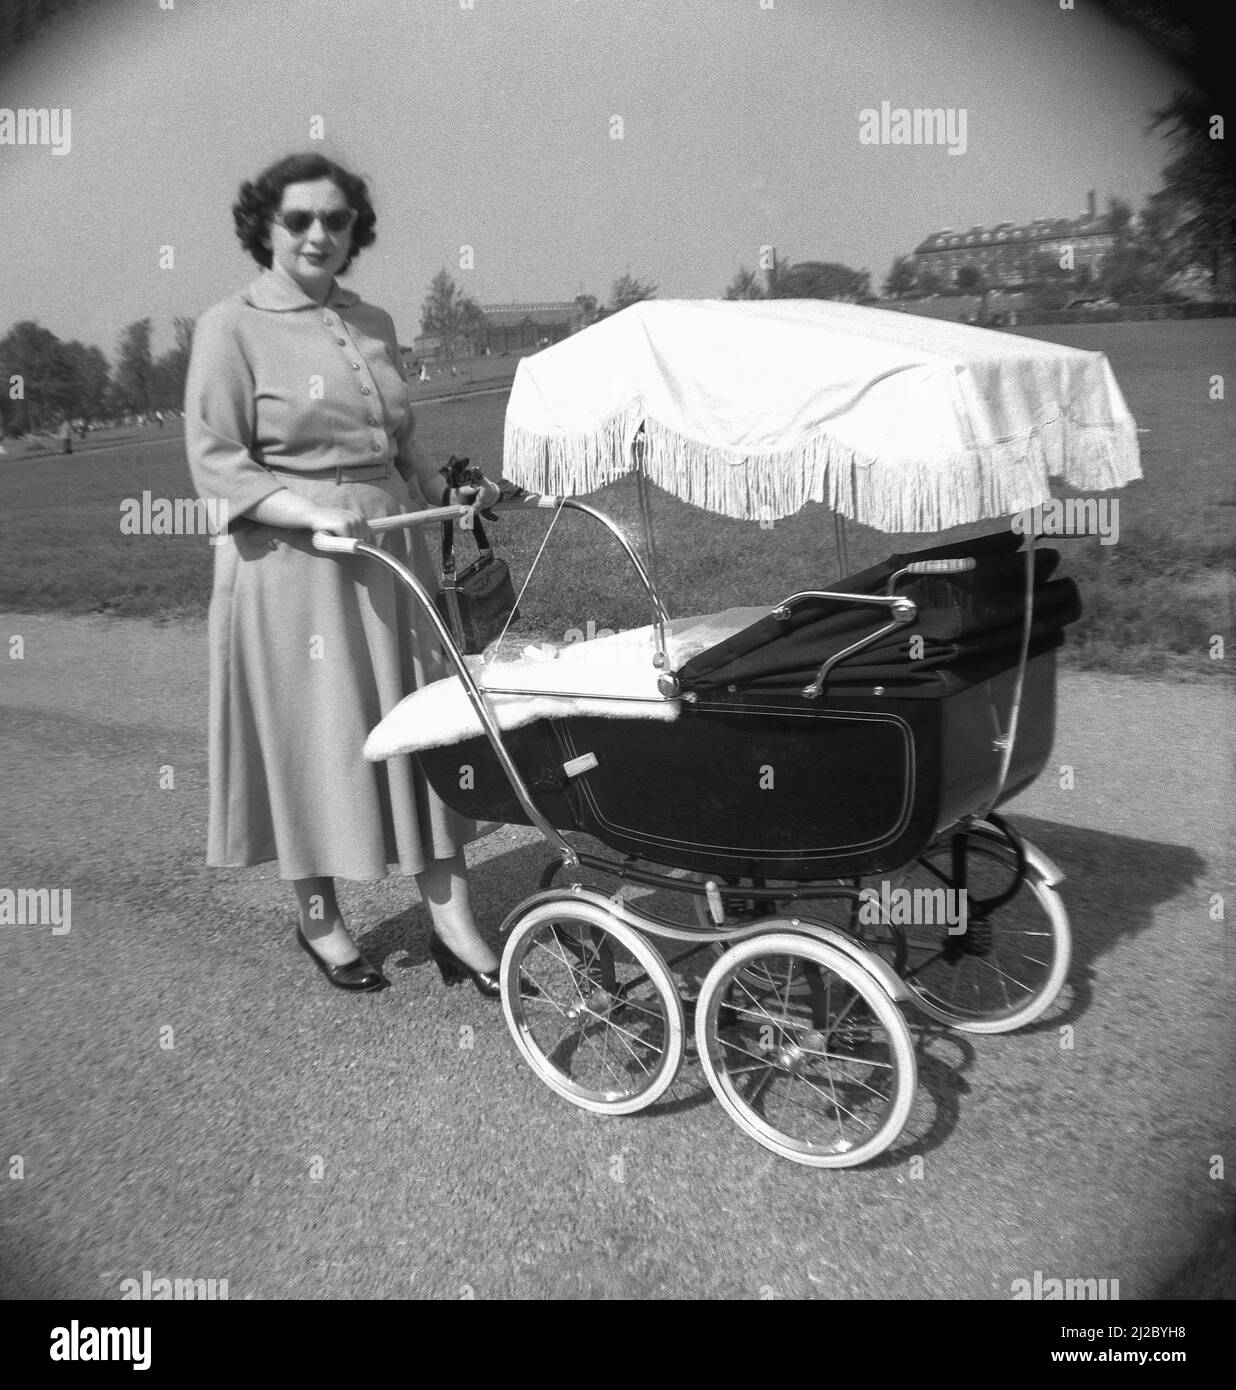 1950s, historical, outside on a path in a park, a lady in a dress and shoes with a coach-built pram or baby carriage of the era, with shade, Shrewsbury Park, England, UK. A traditional coach-built pram was a popular item in this era, having many benefits for both mother and child. A sturdy steel chassis, suspension and large wire wheels meant it was light to push, while a padded mattress in a deep, solid pram meant a comfortable ride for the baby. An added advantage was the baby's position, high-up, facing the parent, meant plenty of eye contact. Stock Photo